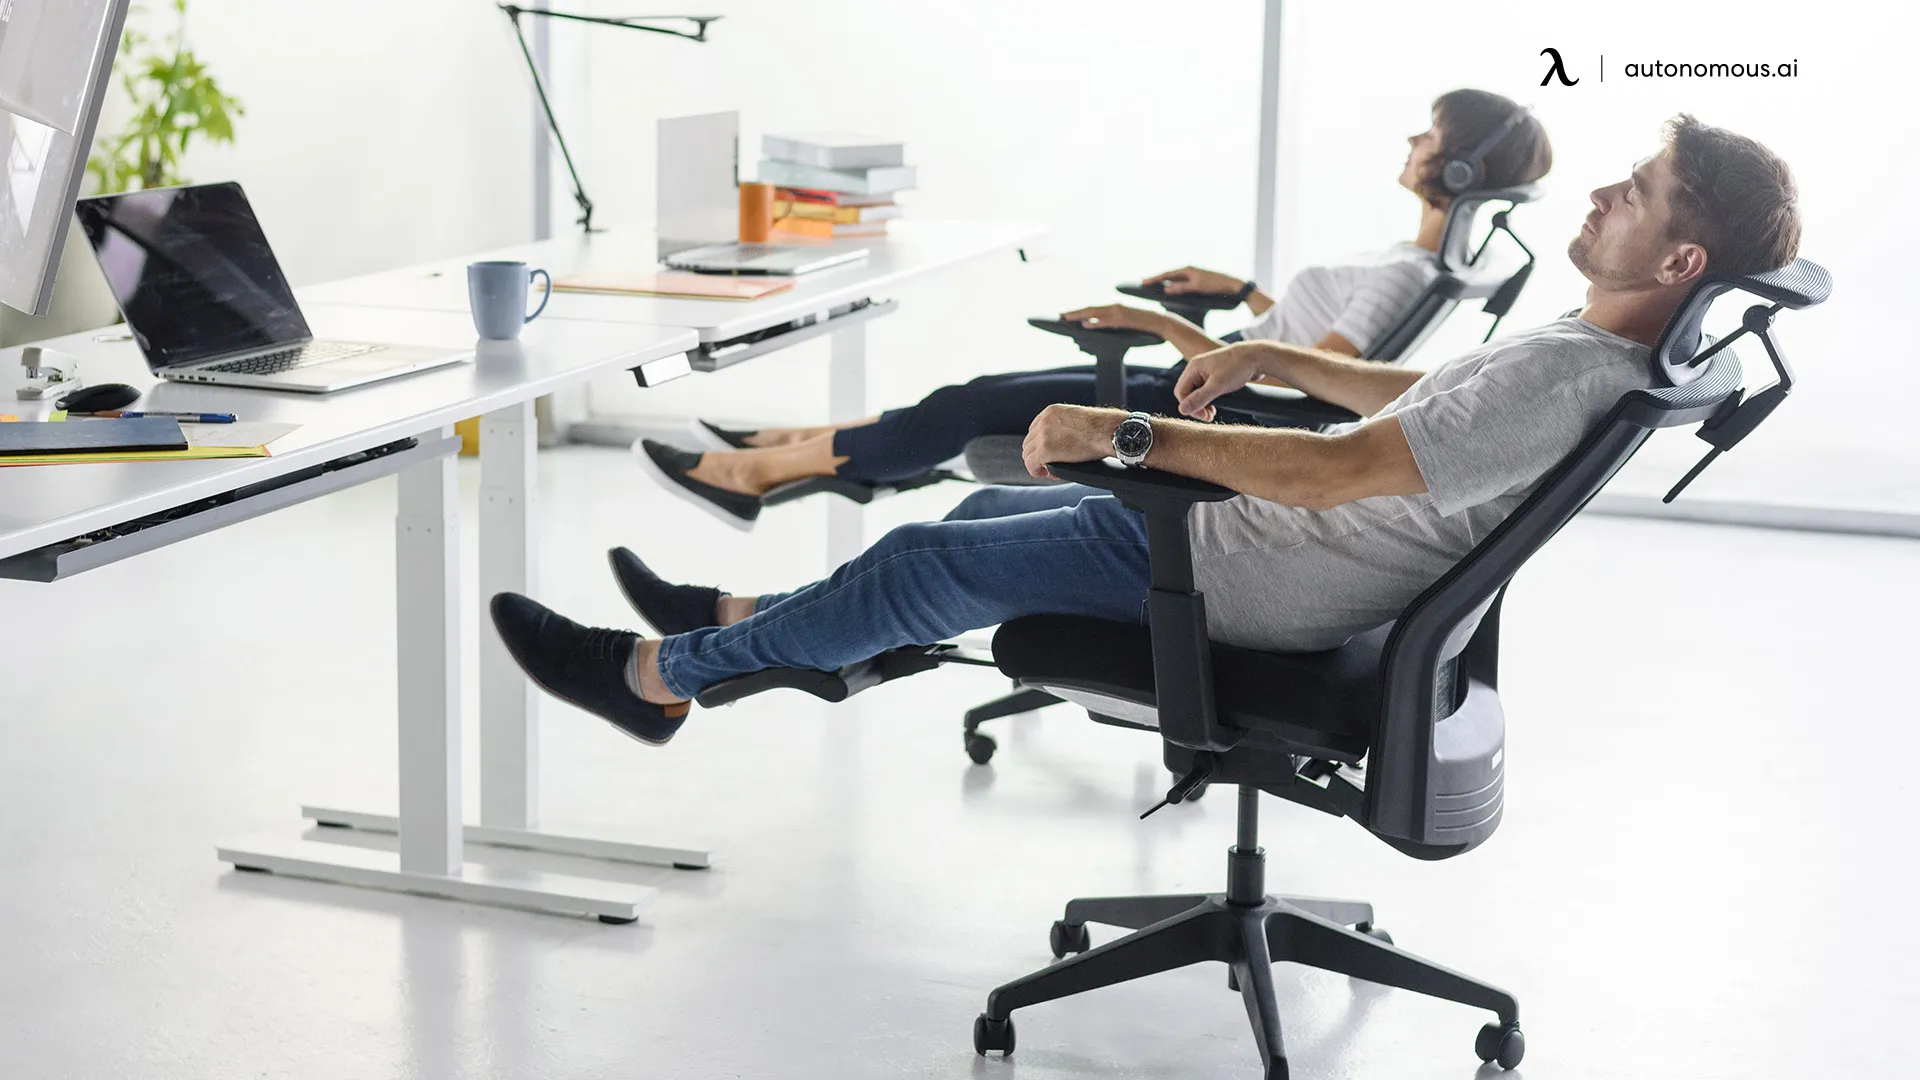 Ergonomic Chairs for Comfort and Productivity